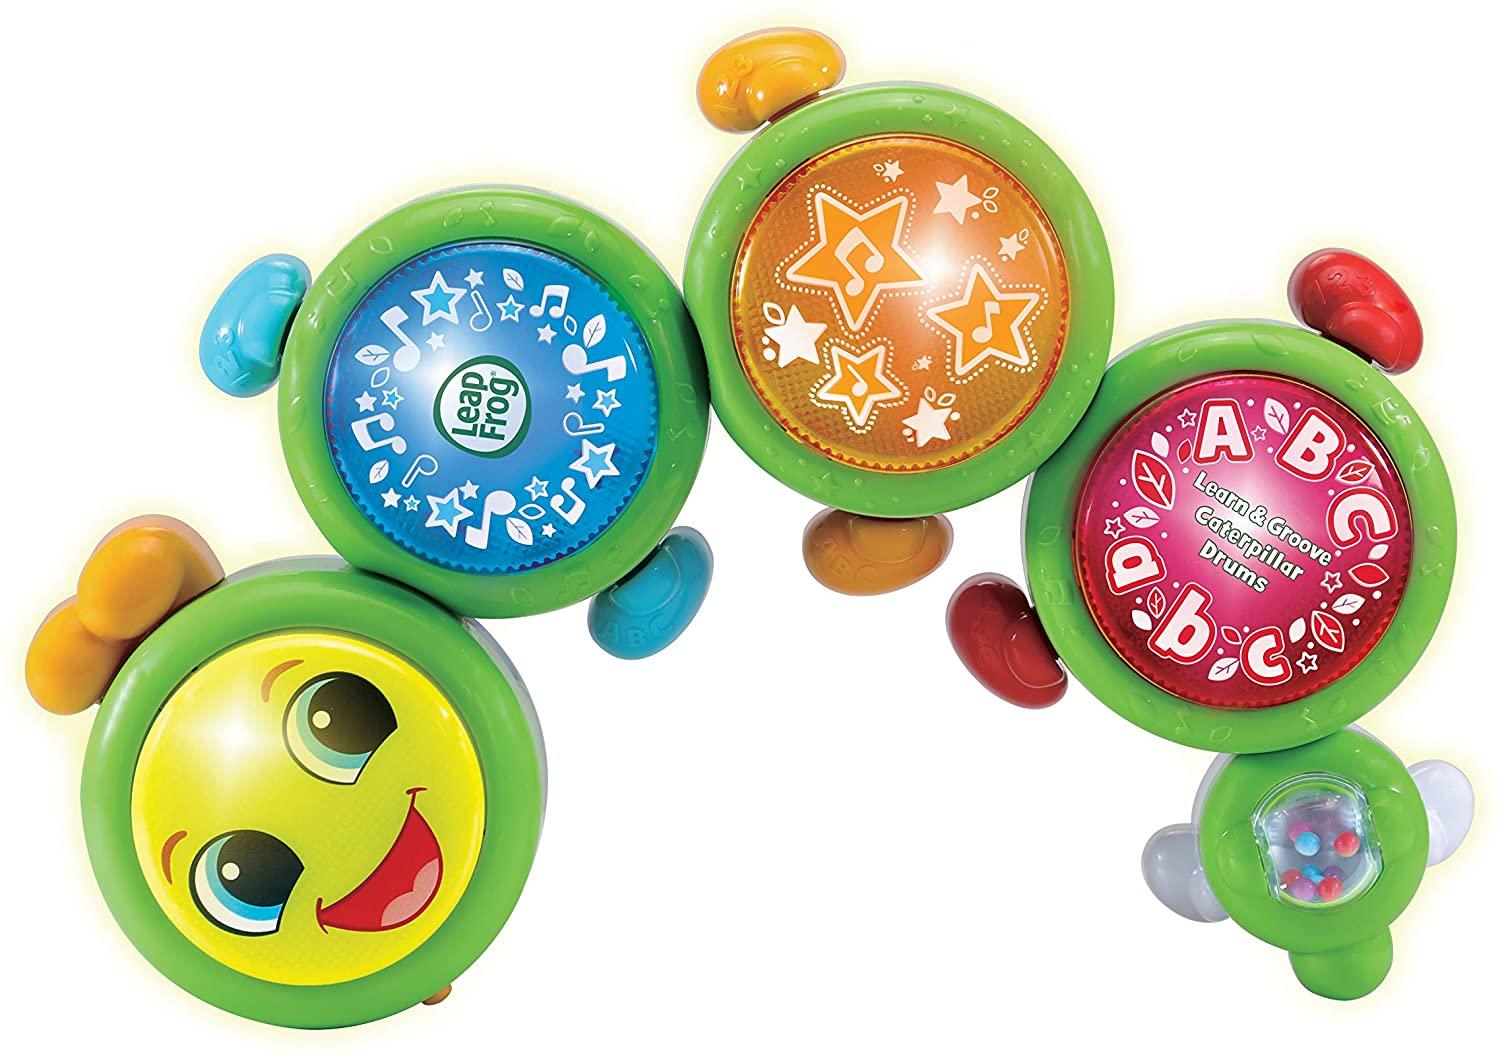 Leapfrog Learn And Groove Caterpillar Drums Toymaster Ballina